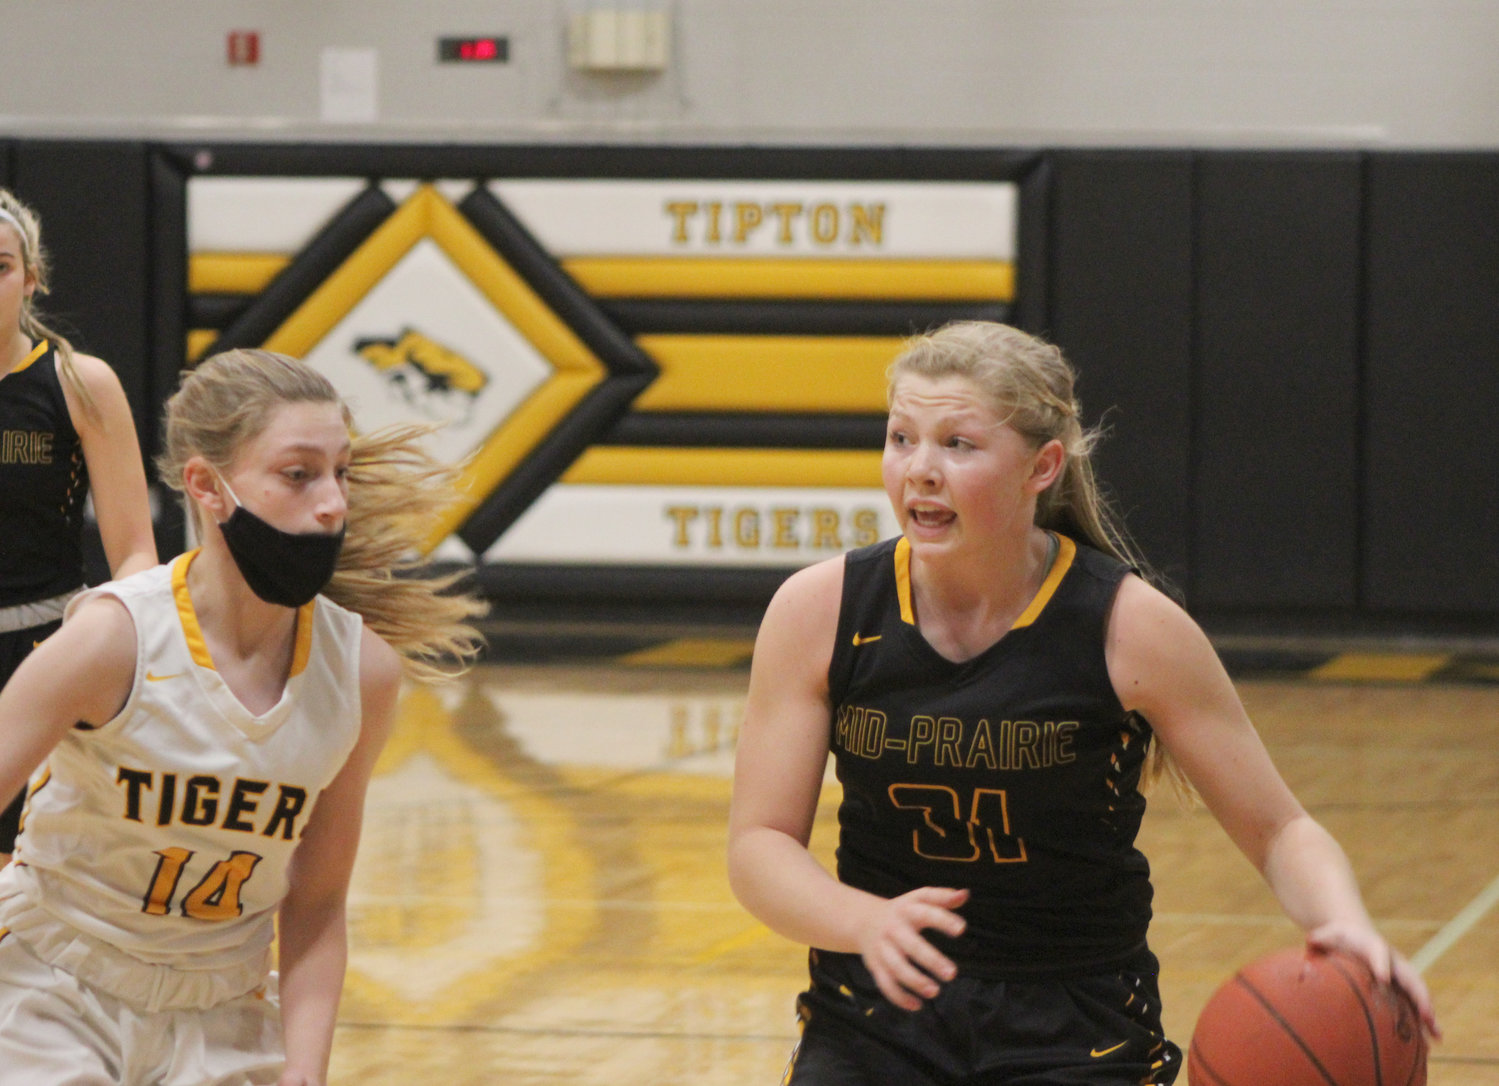 Mid-Prairie senior Myah Lugar moves the ball into the front court as Tipton’s Carly Langenburg defends during Friday’s game. Lugar scored 24 points and leads Mid-Prairie with 41 through three games.